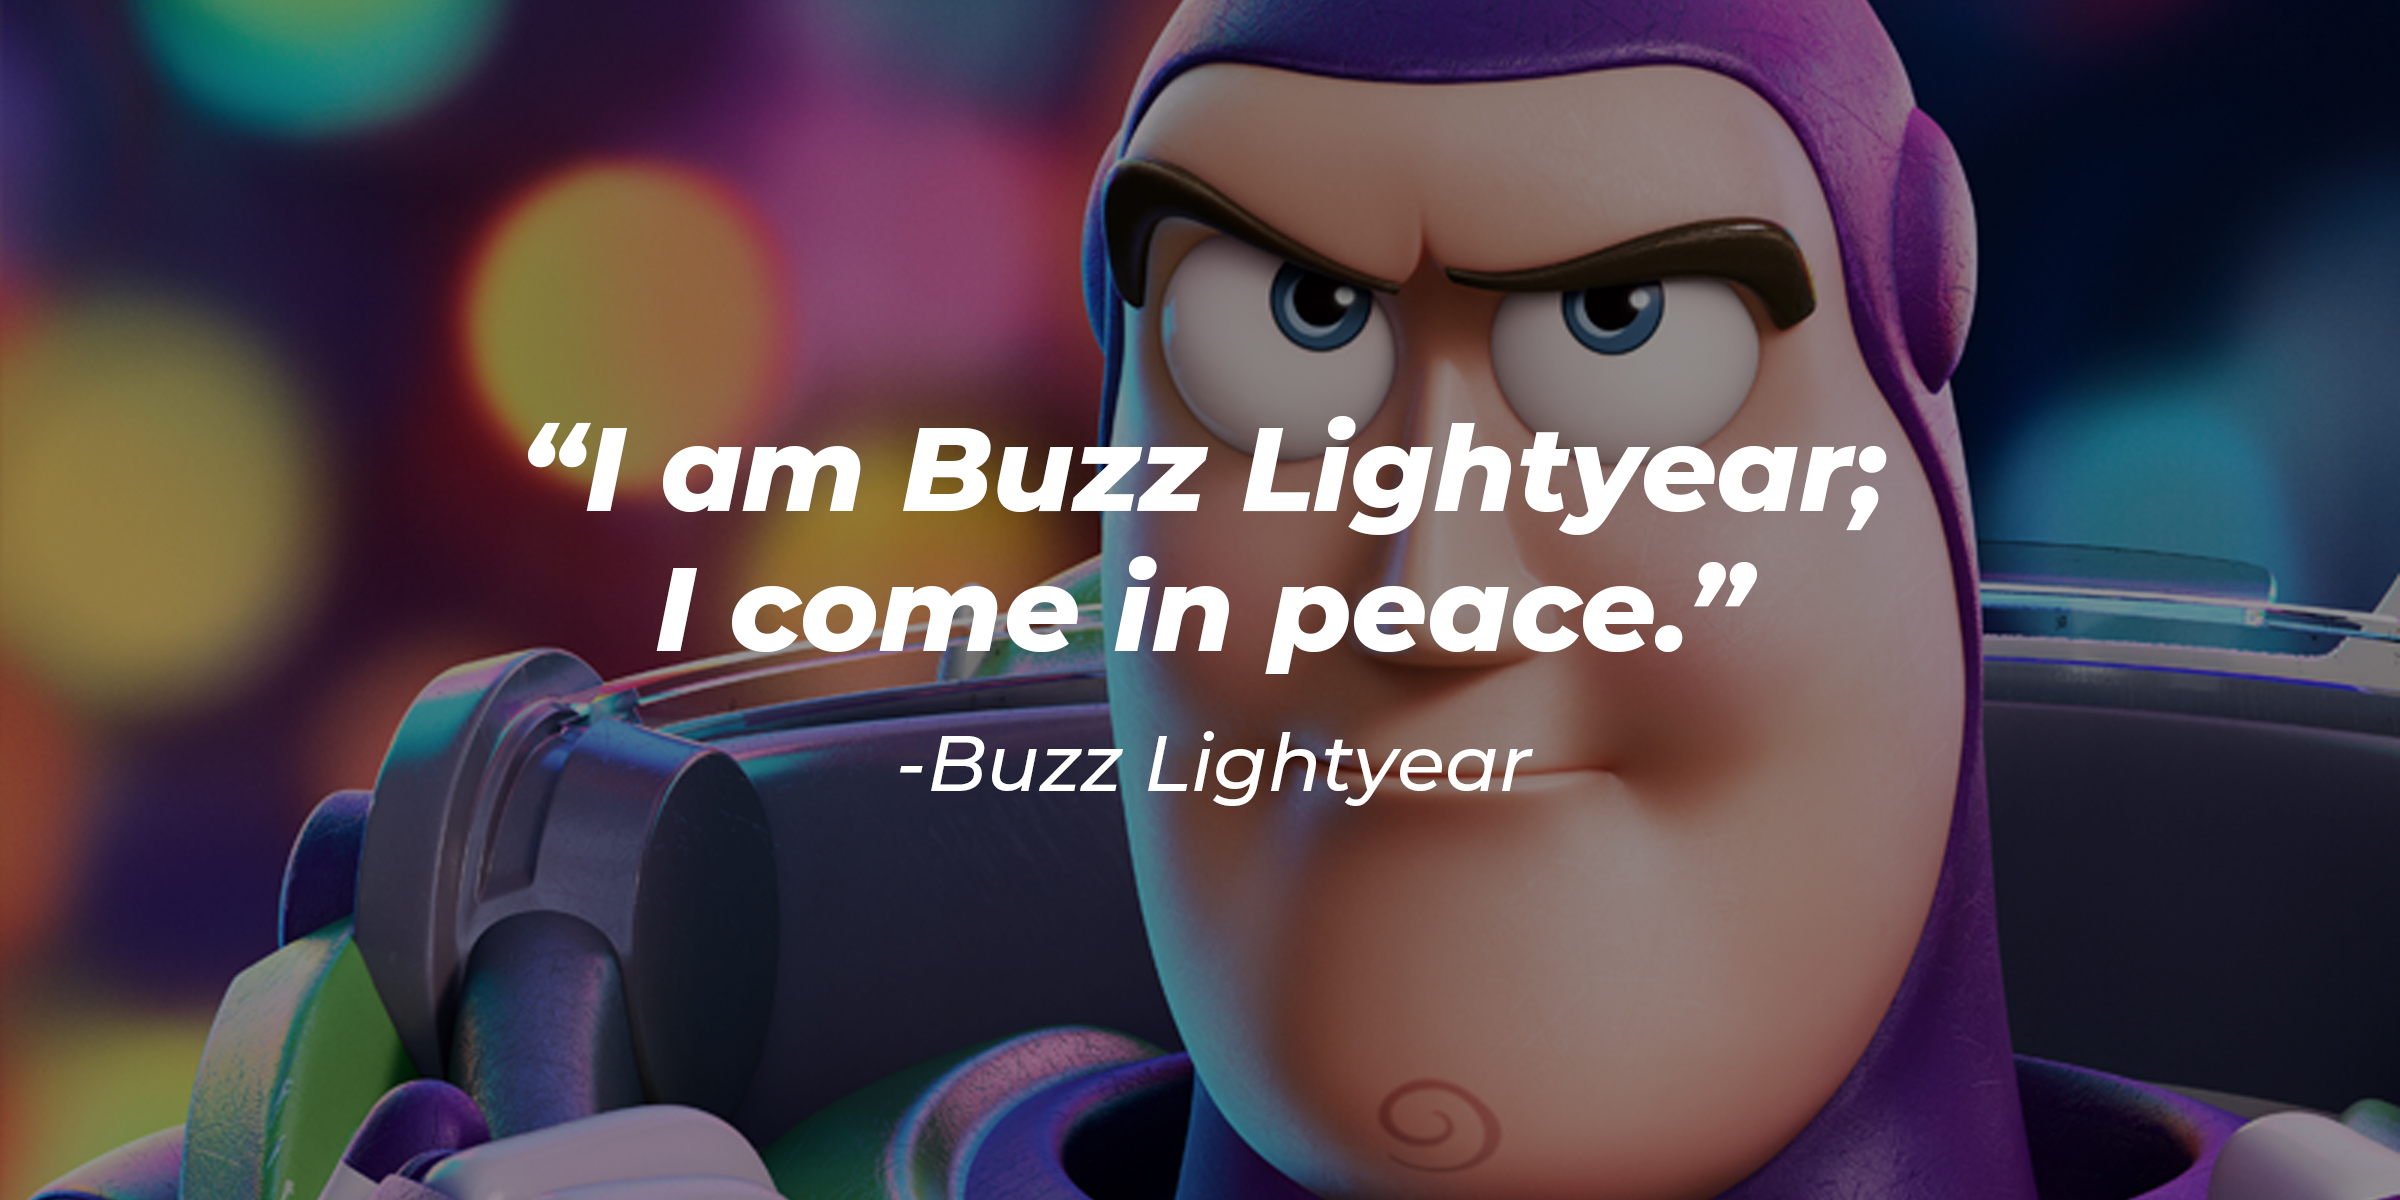 Buzz Lightyear's quote: "I am Buzz Lightyear; I come in peace." | Source: Facebook/BuzzLightyear